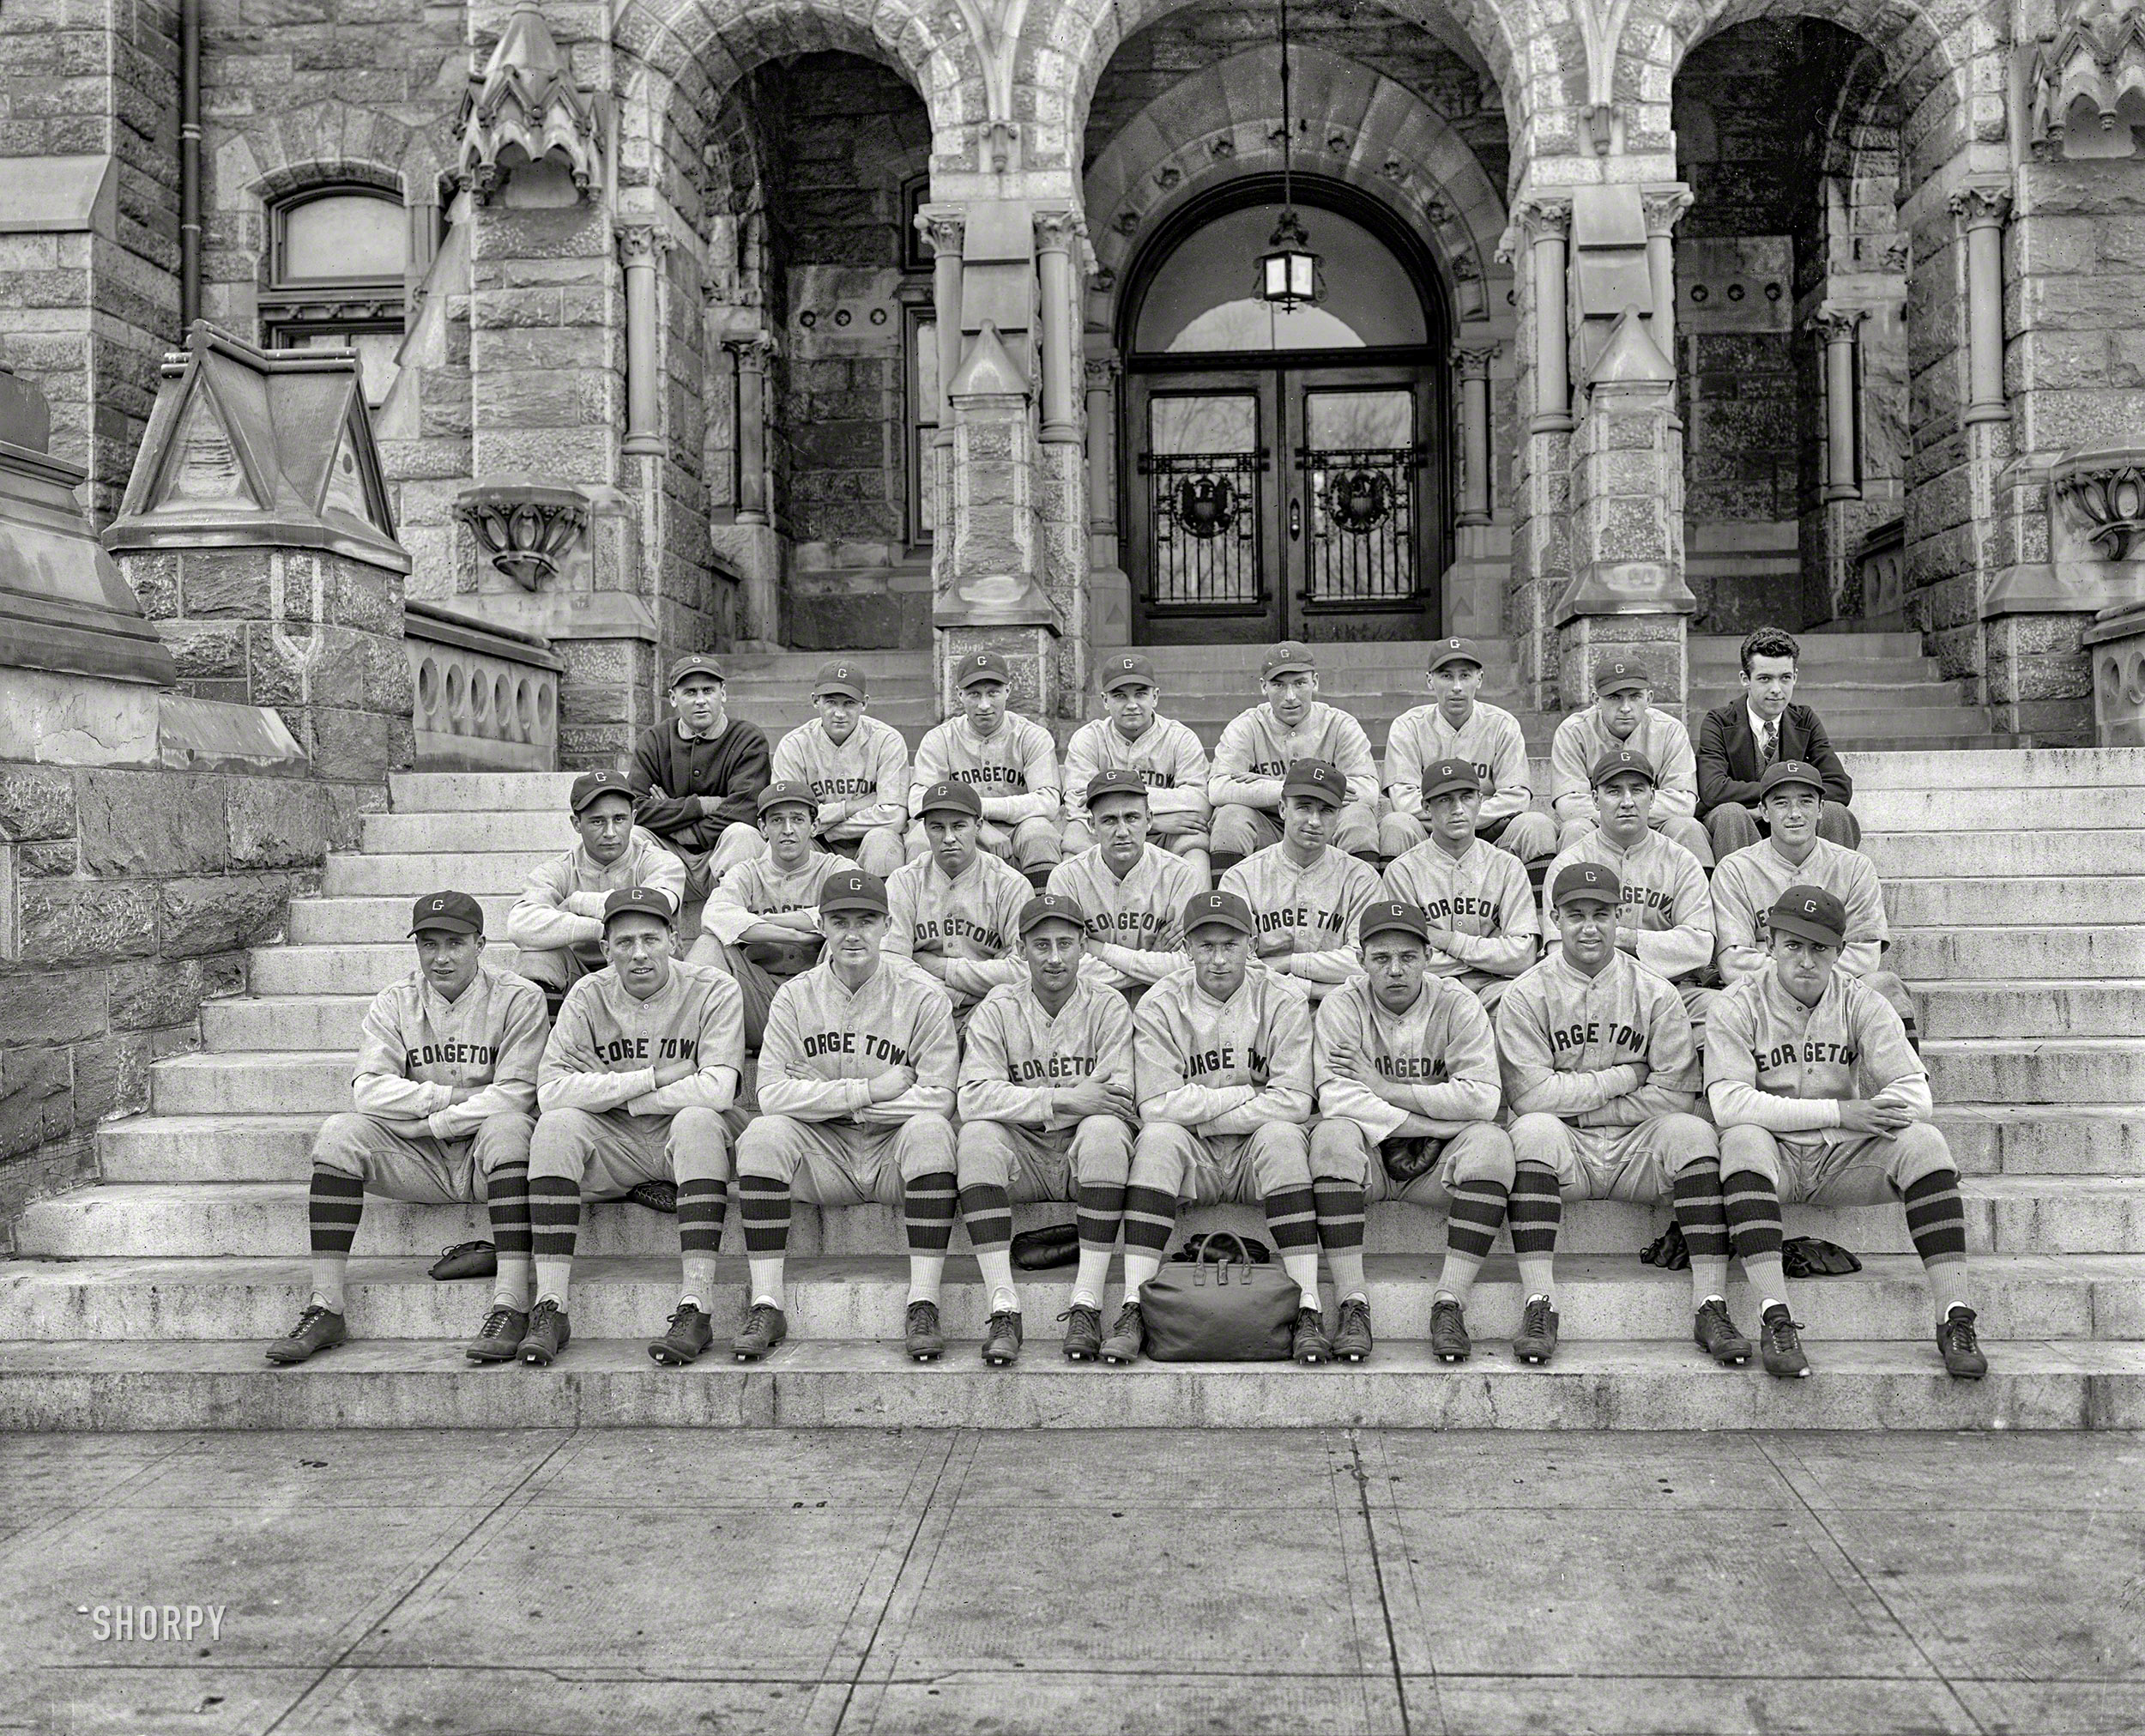 Washington, D.C. "1928 Georgetown University baseball team at Healy Hall." National Photo Company Collection glass negative. View full size.